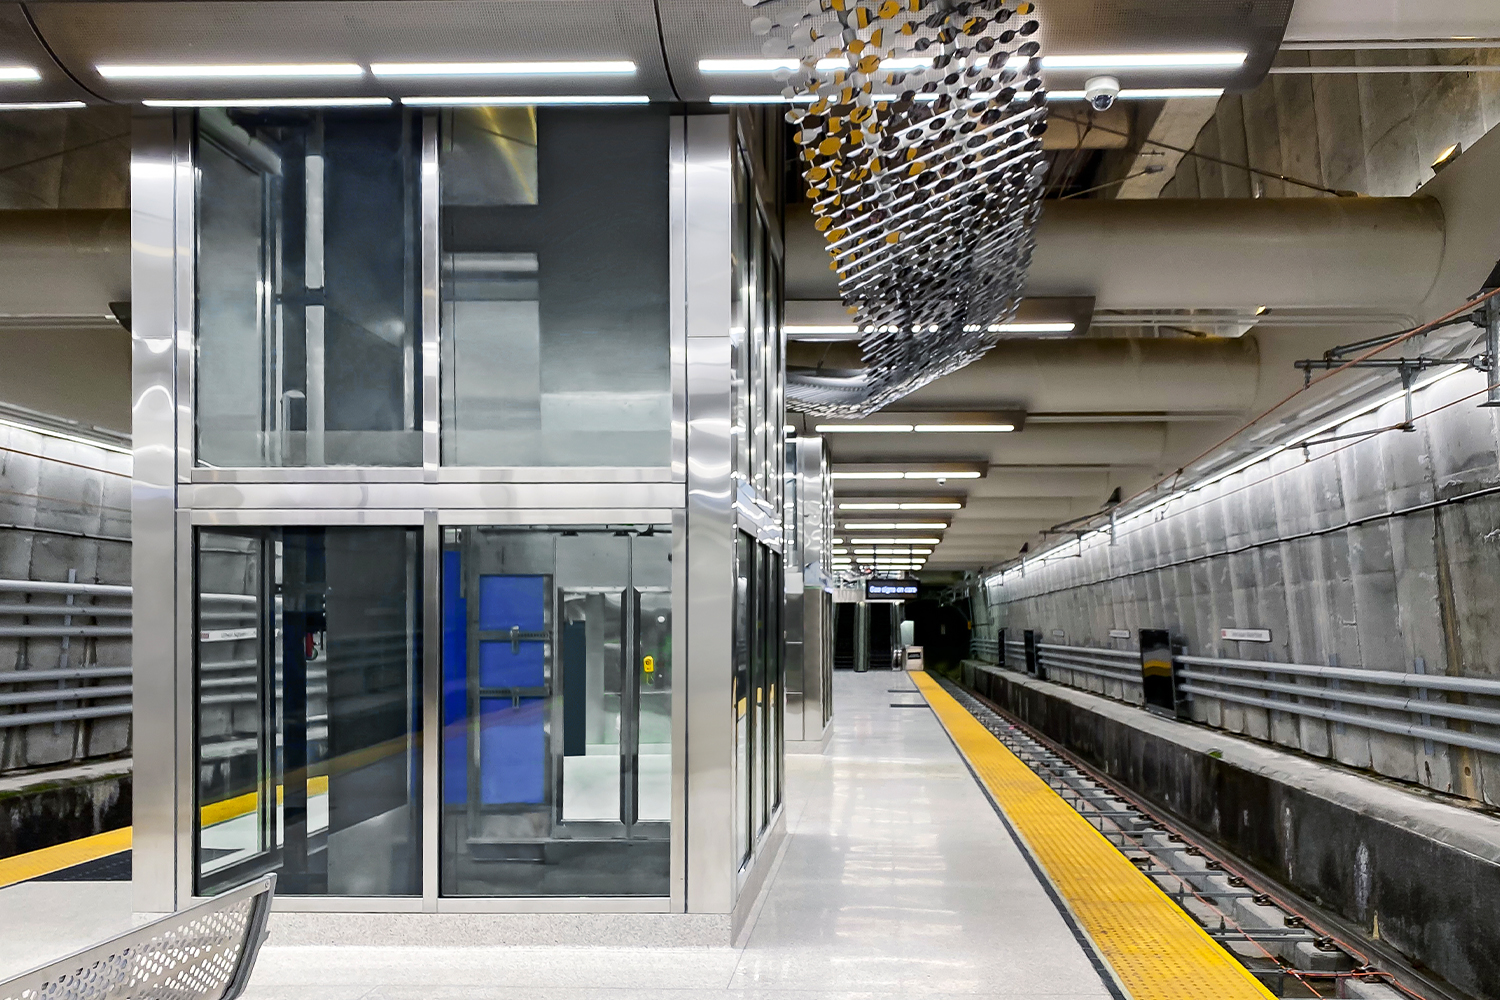 2-hour fire resistive glass elevator enclosure by SAFTI FIRST® at San Francisco’s Union Square Station platform